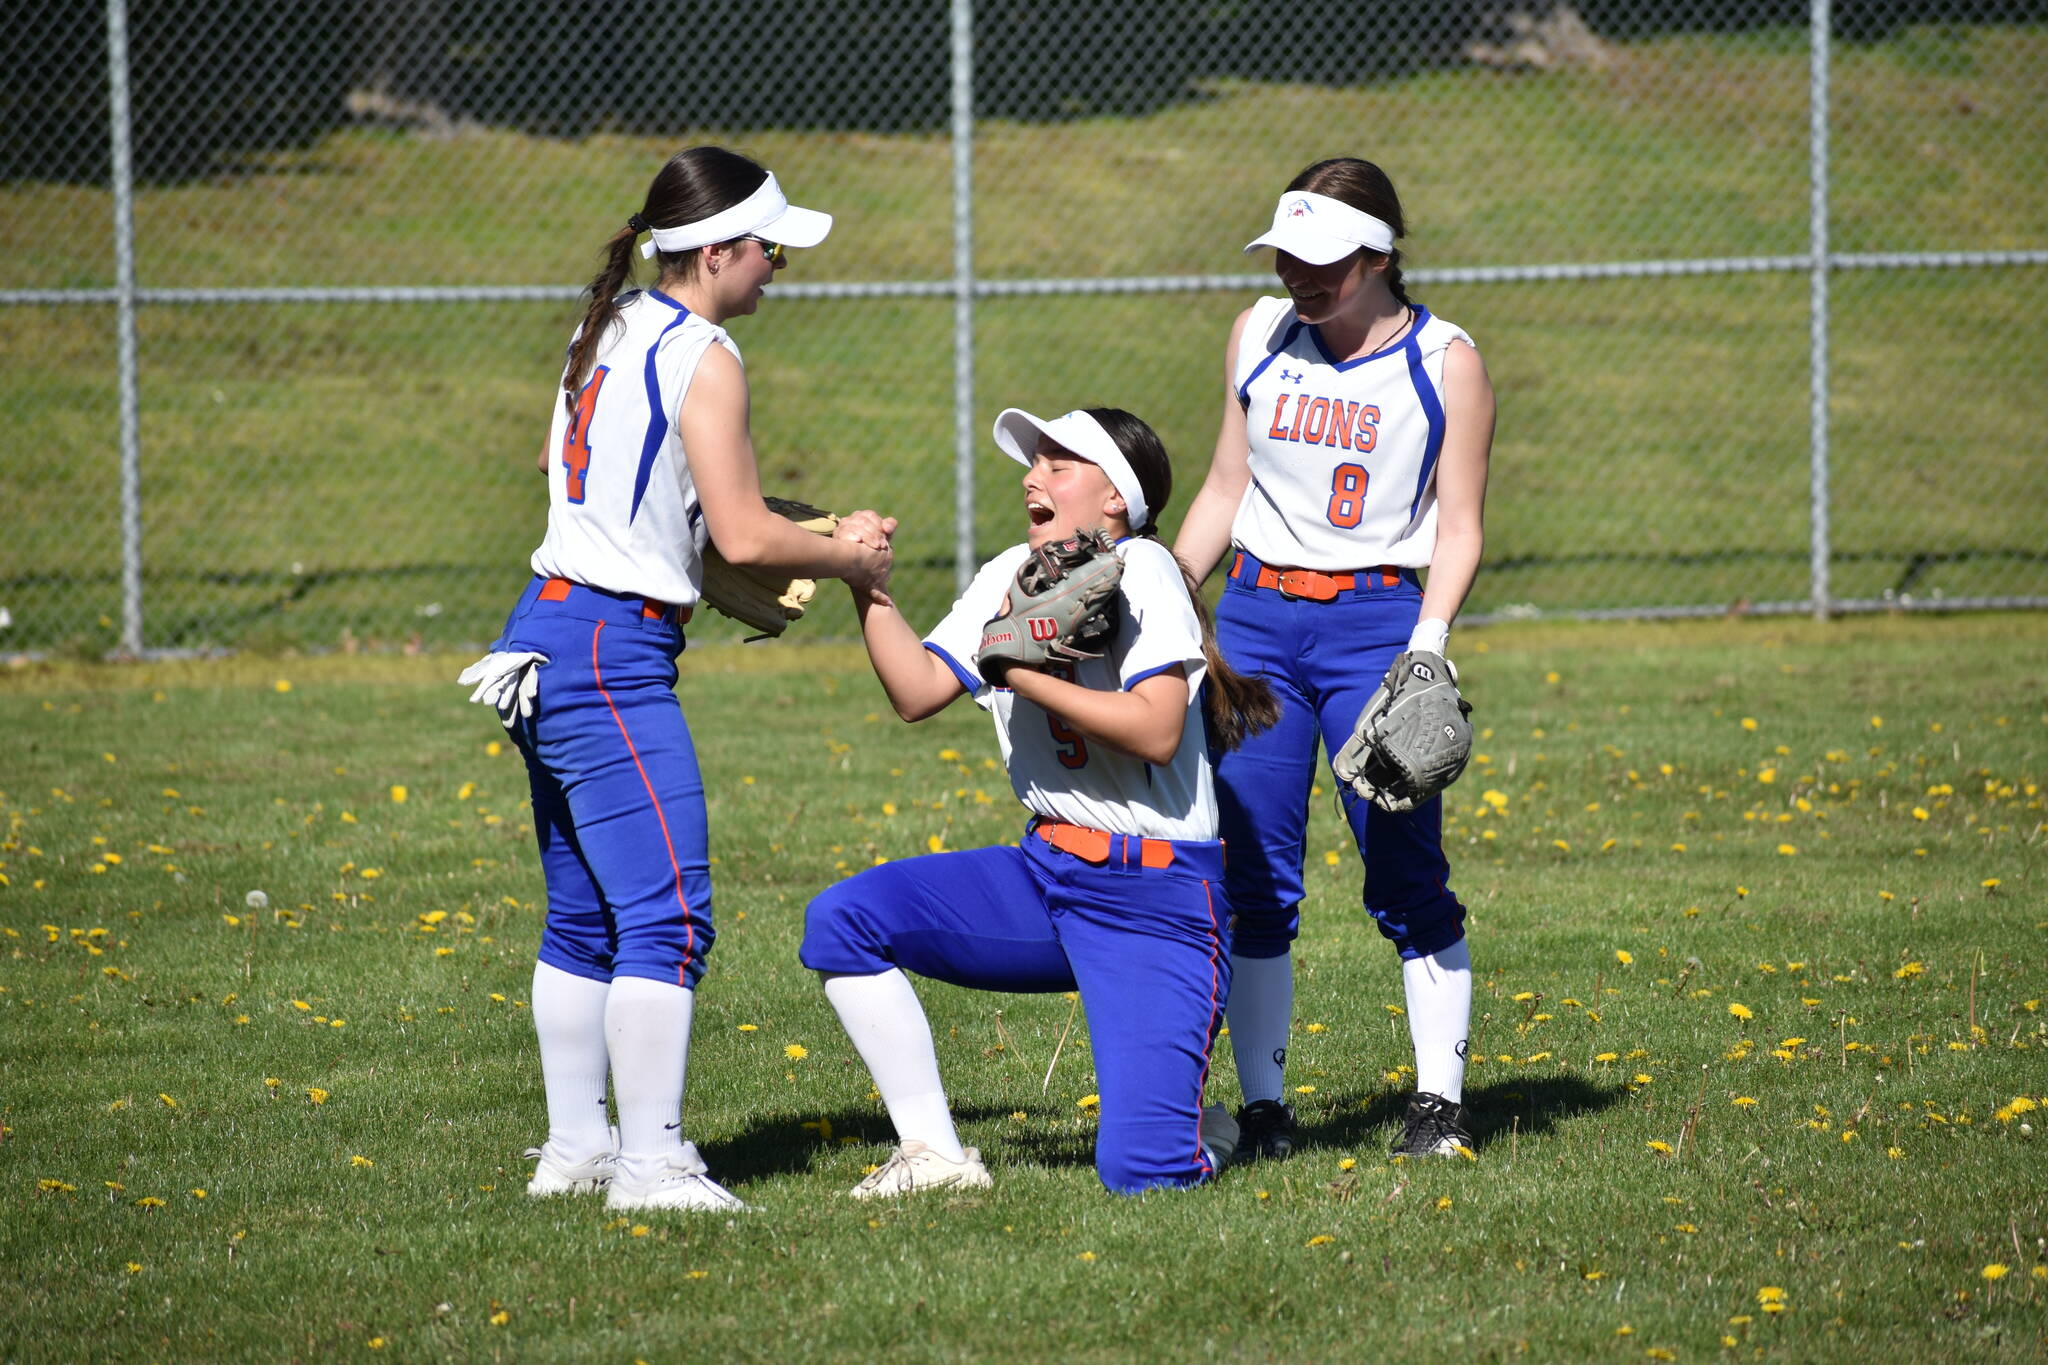 After a close call in the outfield Taylor Minton was helped by her teammates Lily Mcmullen and Shelby Mason. Ben Ray / The Reporter